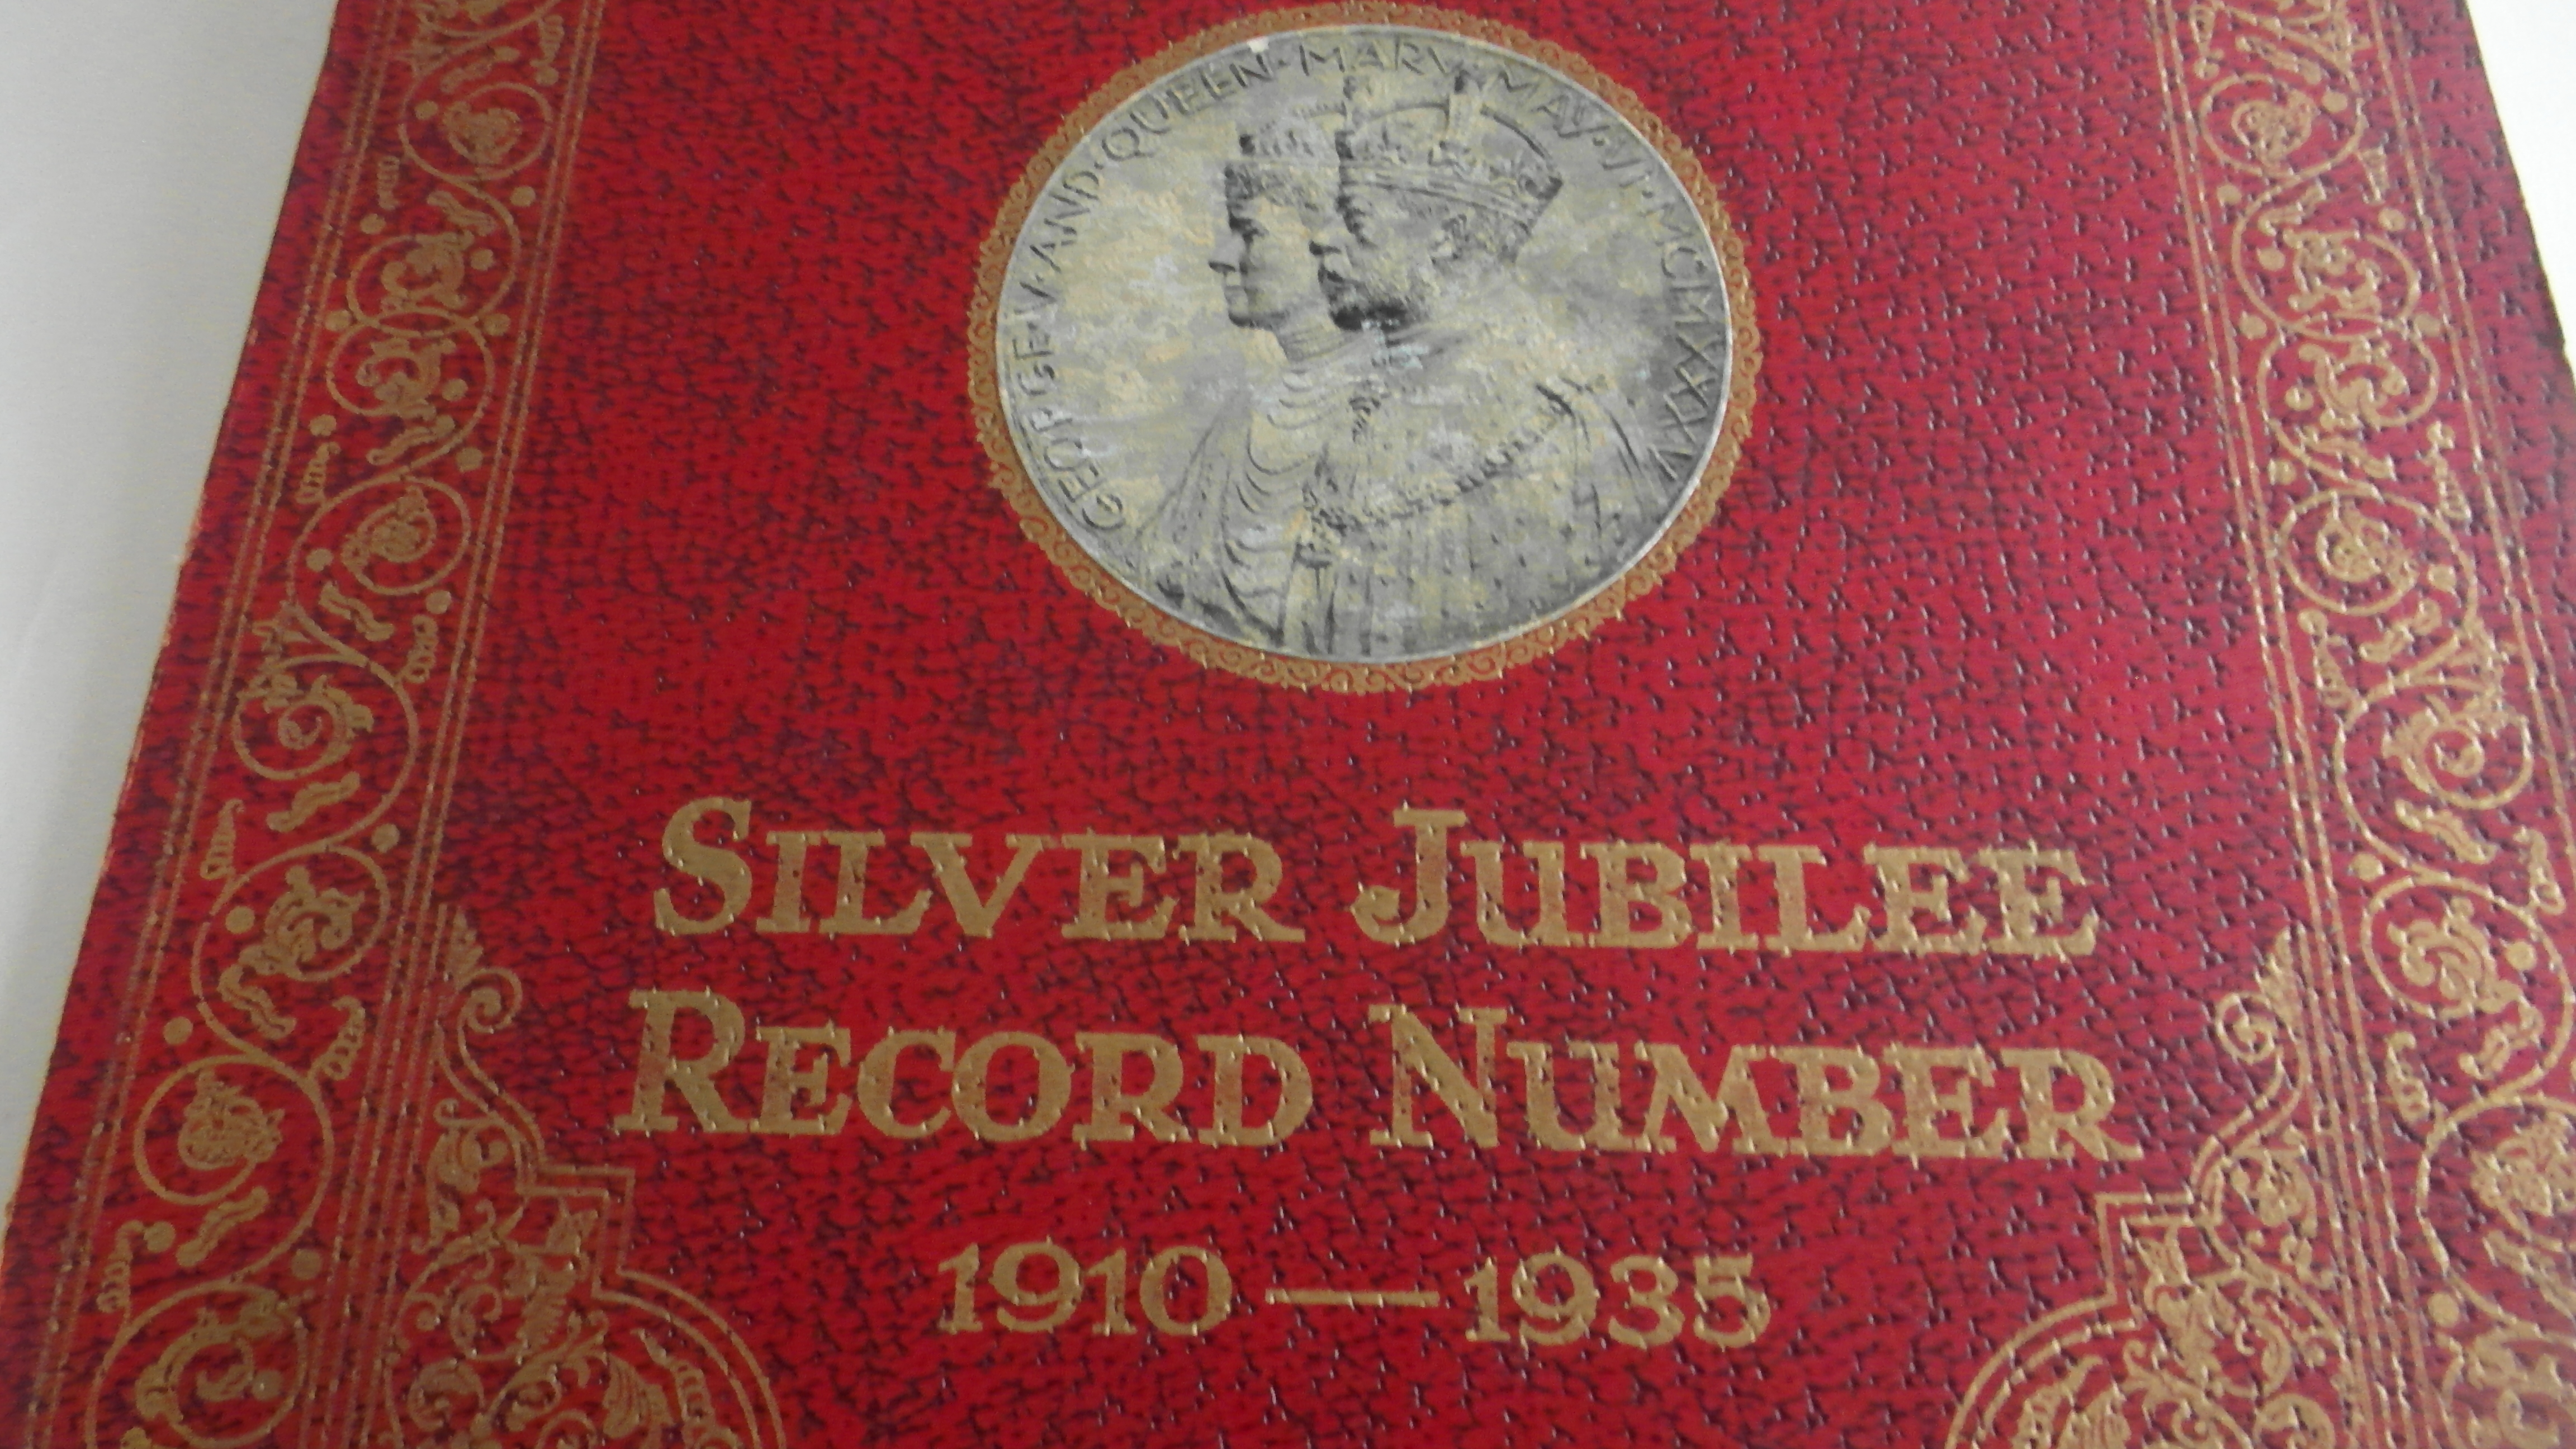 QUITE RARE, THE ILLUSTRATED LONDON NEWS - SILVER JUBILEE GEORGE V (1910-1935) - Image 8 of 11